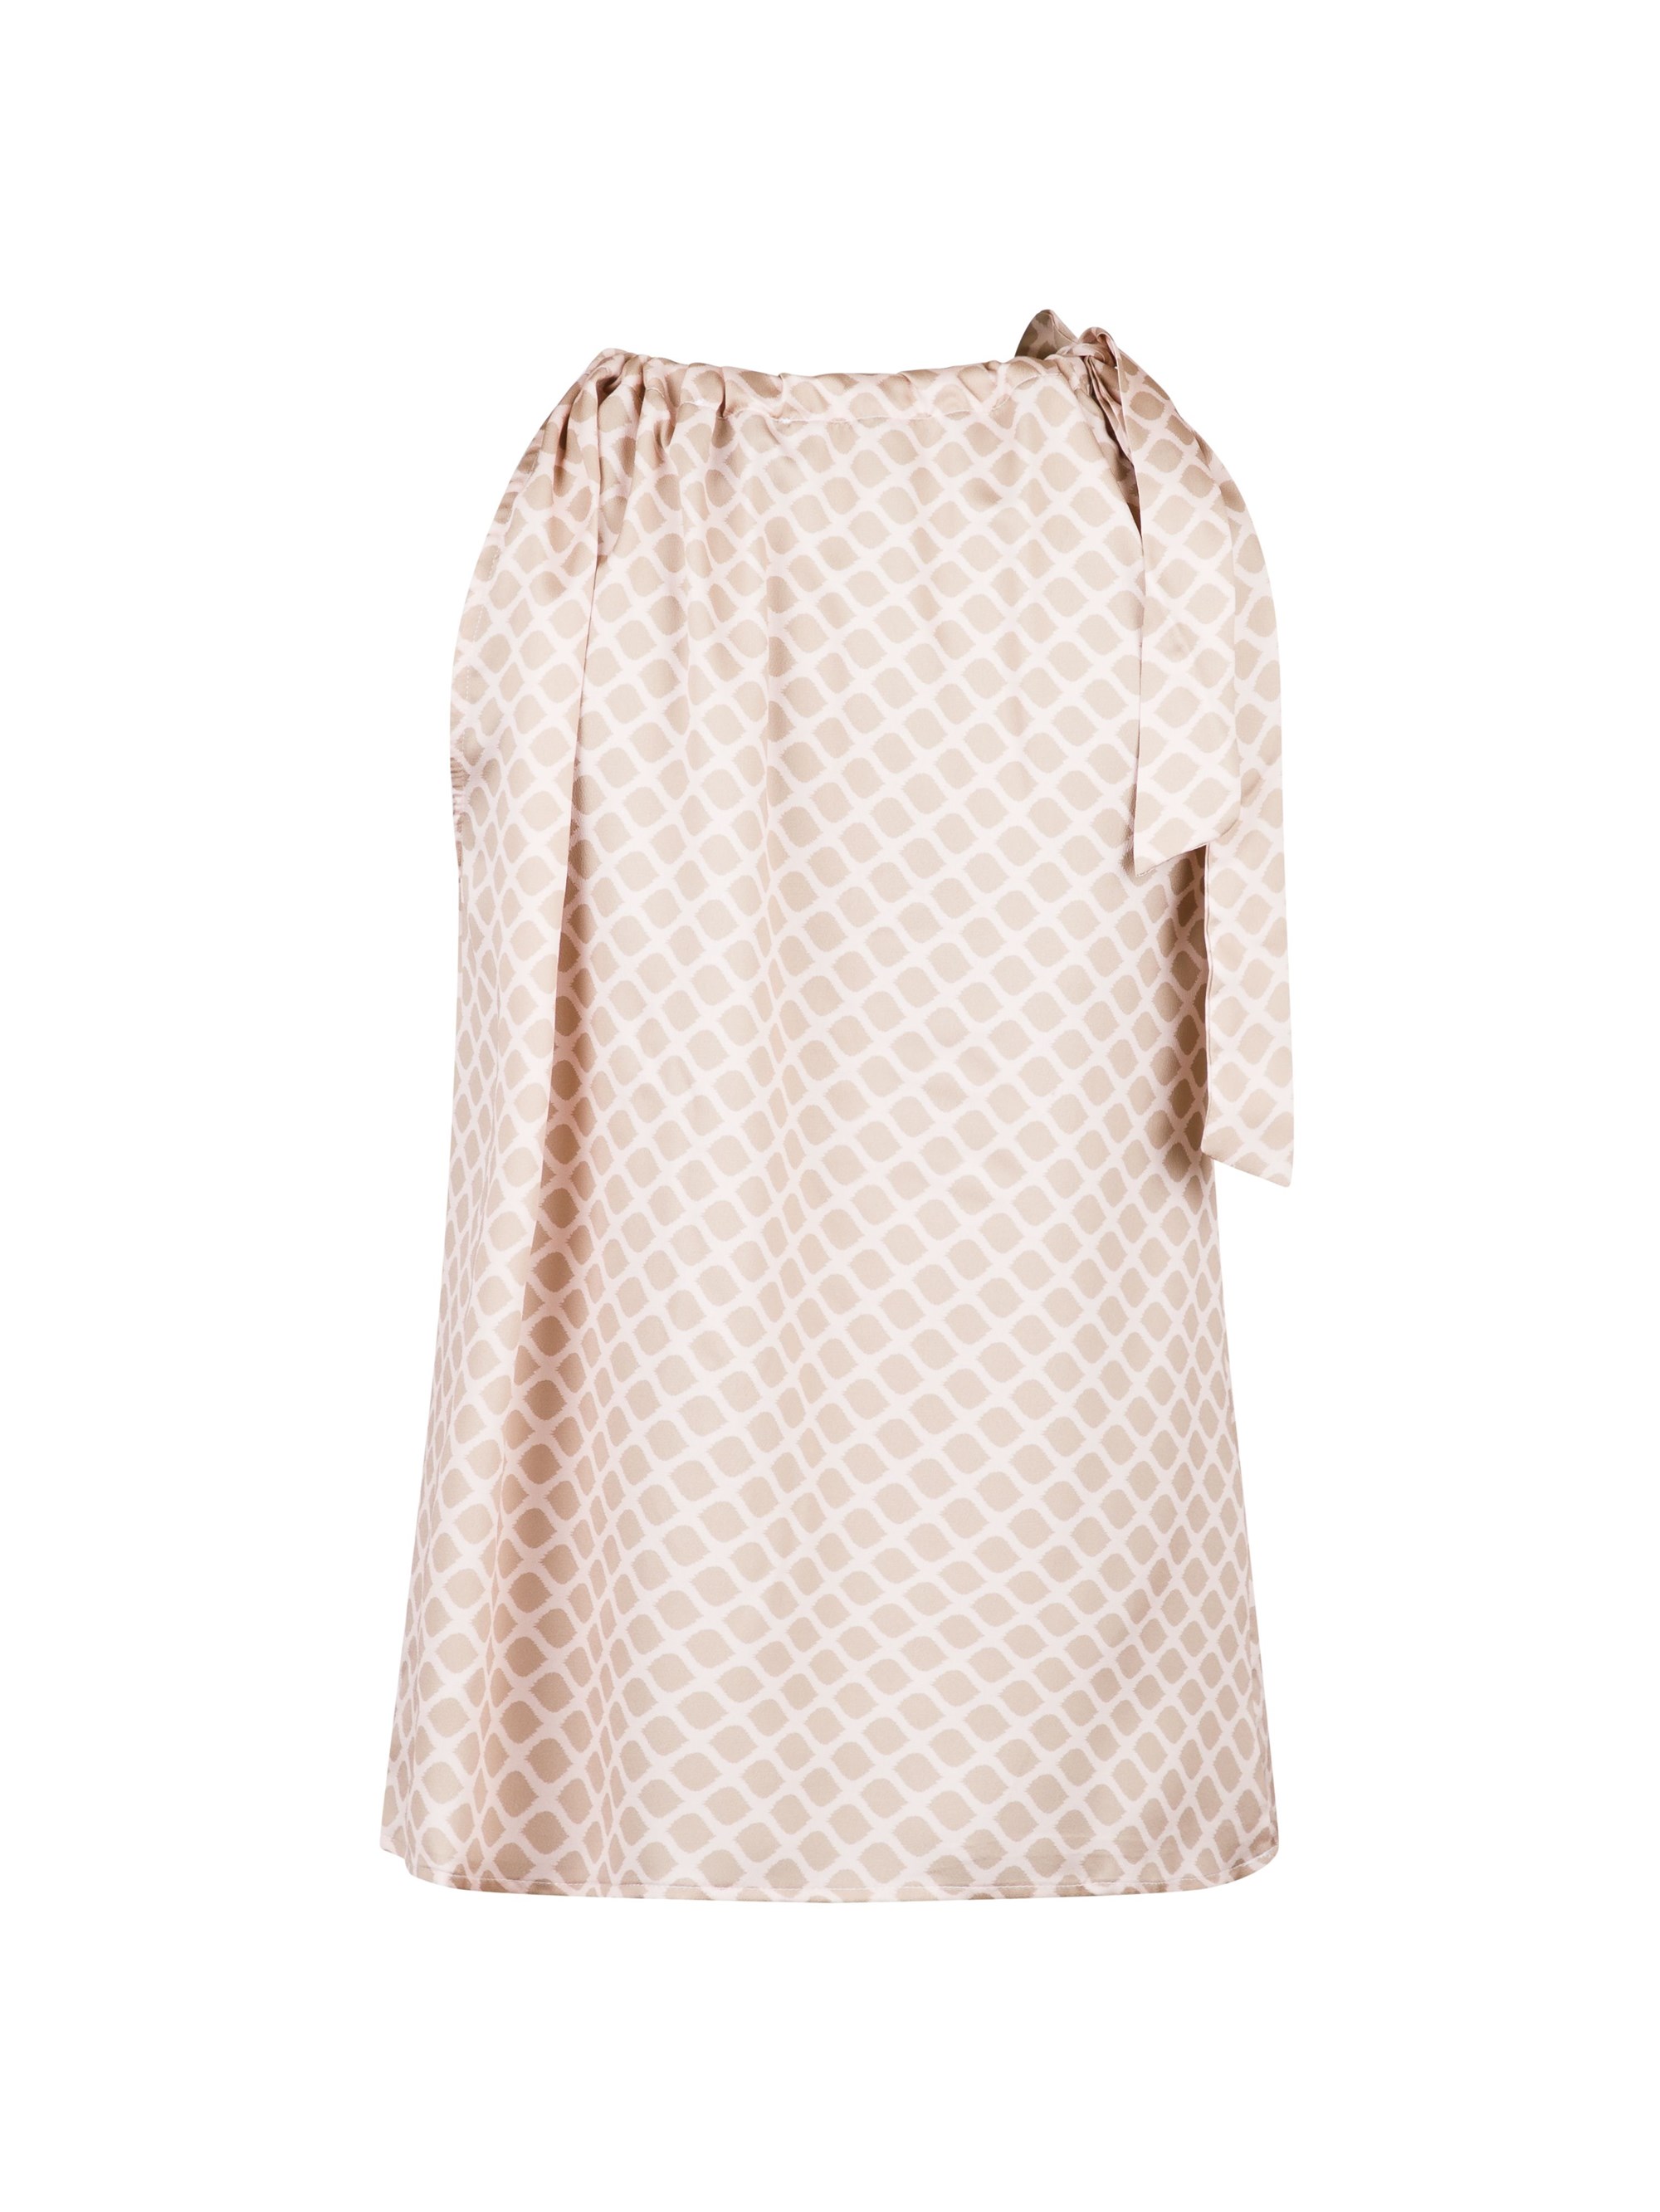 Genoplive perforere Meddele Neo Noir - Linea Bubble Graphic Top Sand